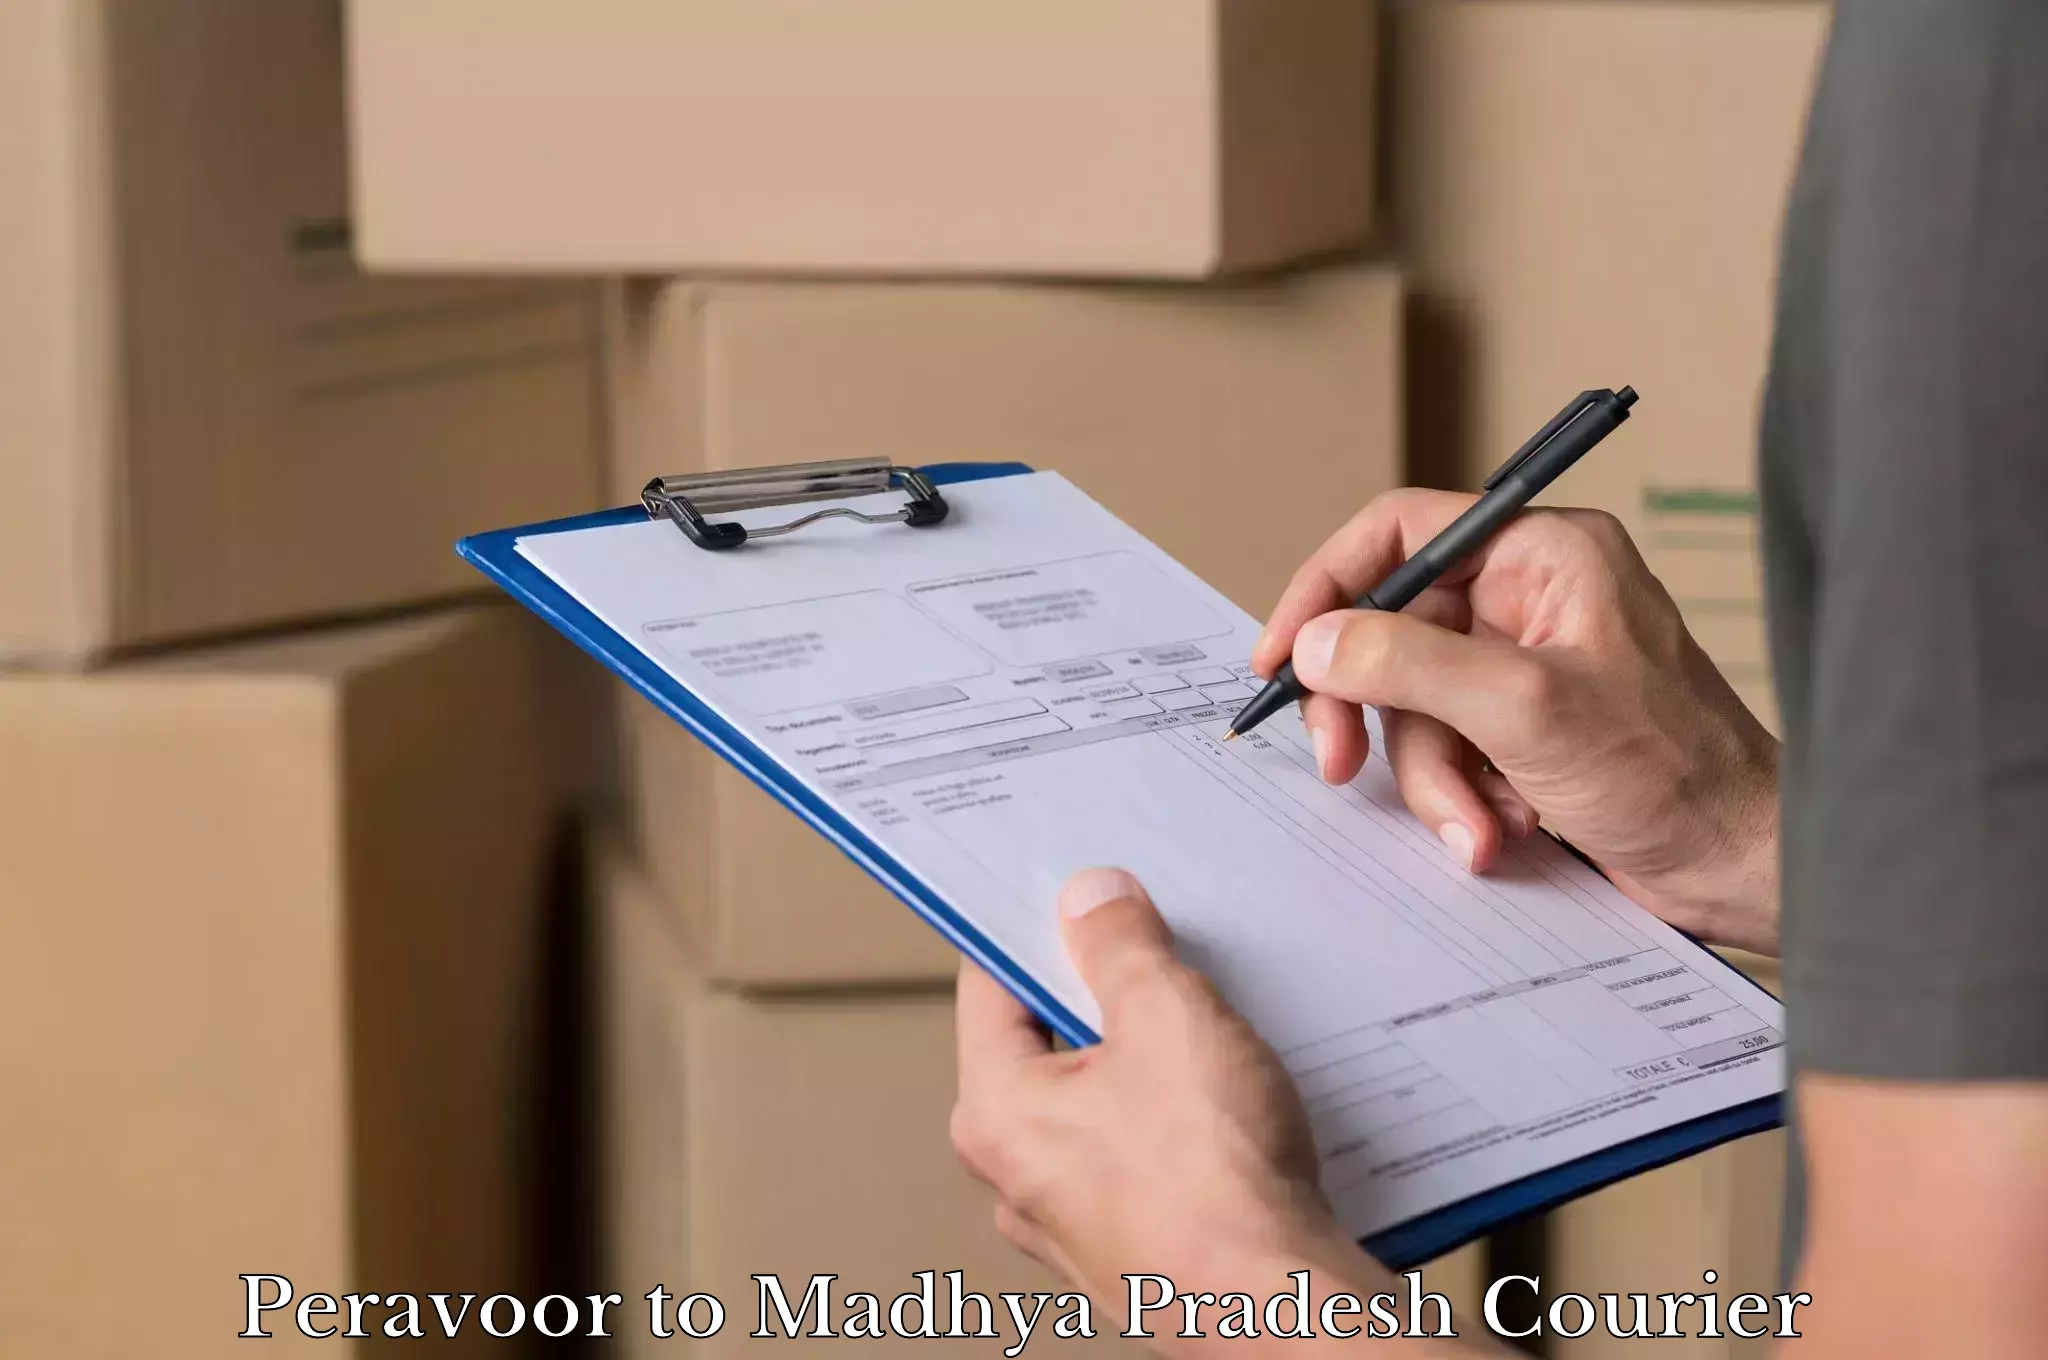 Luggage delivery providers Peravoor to Mandideep